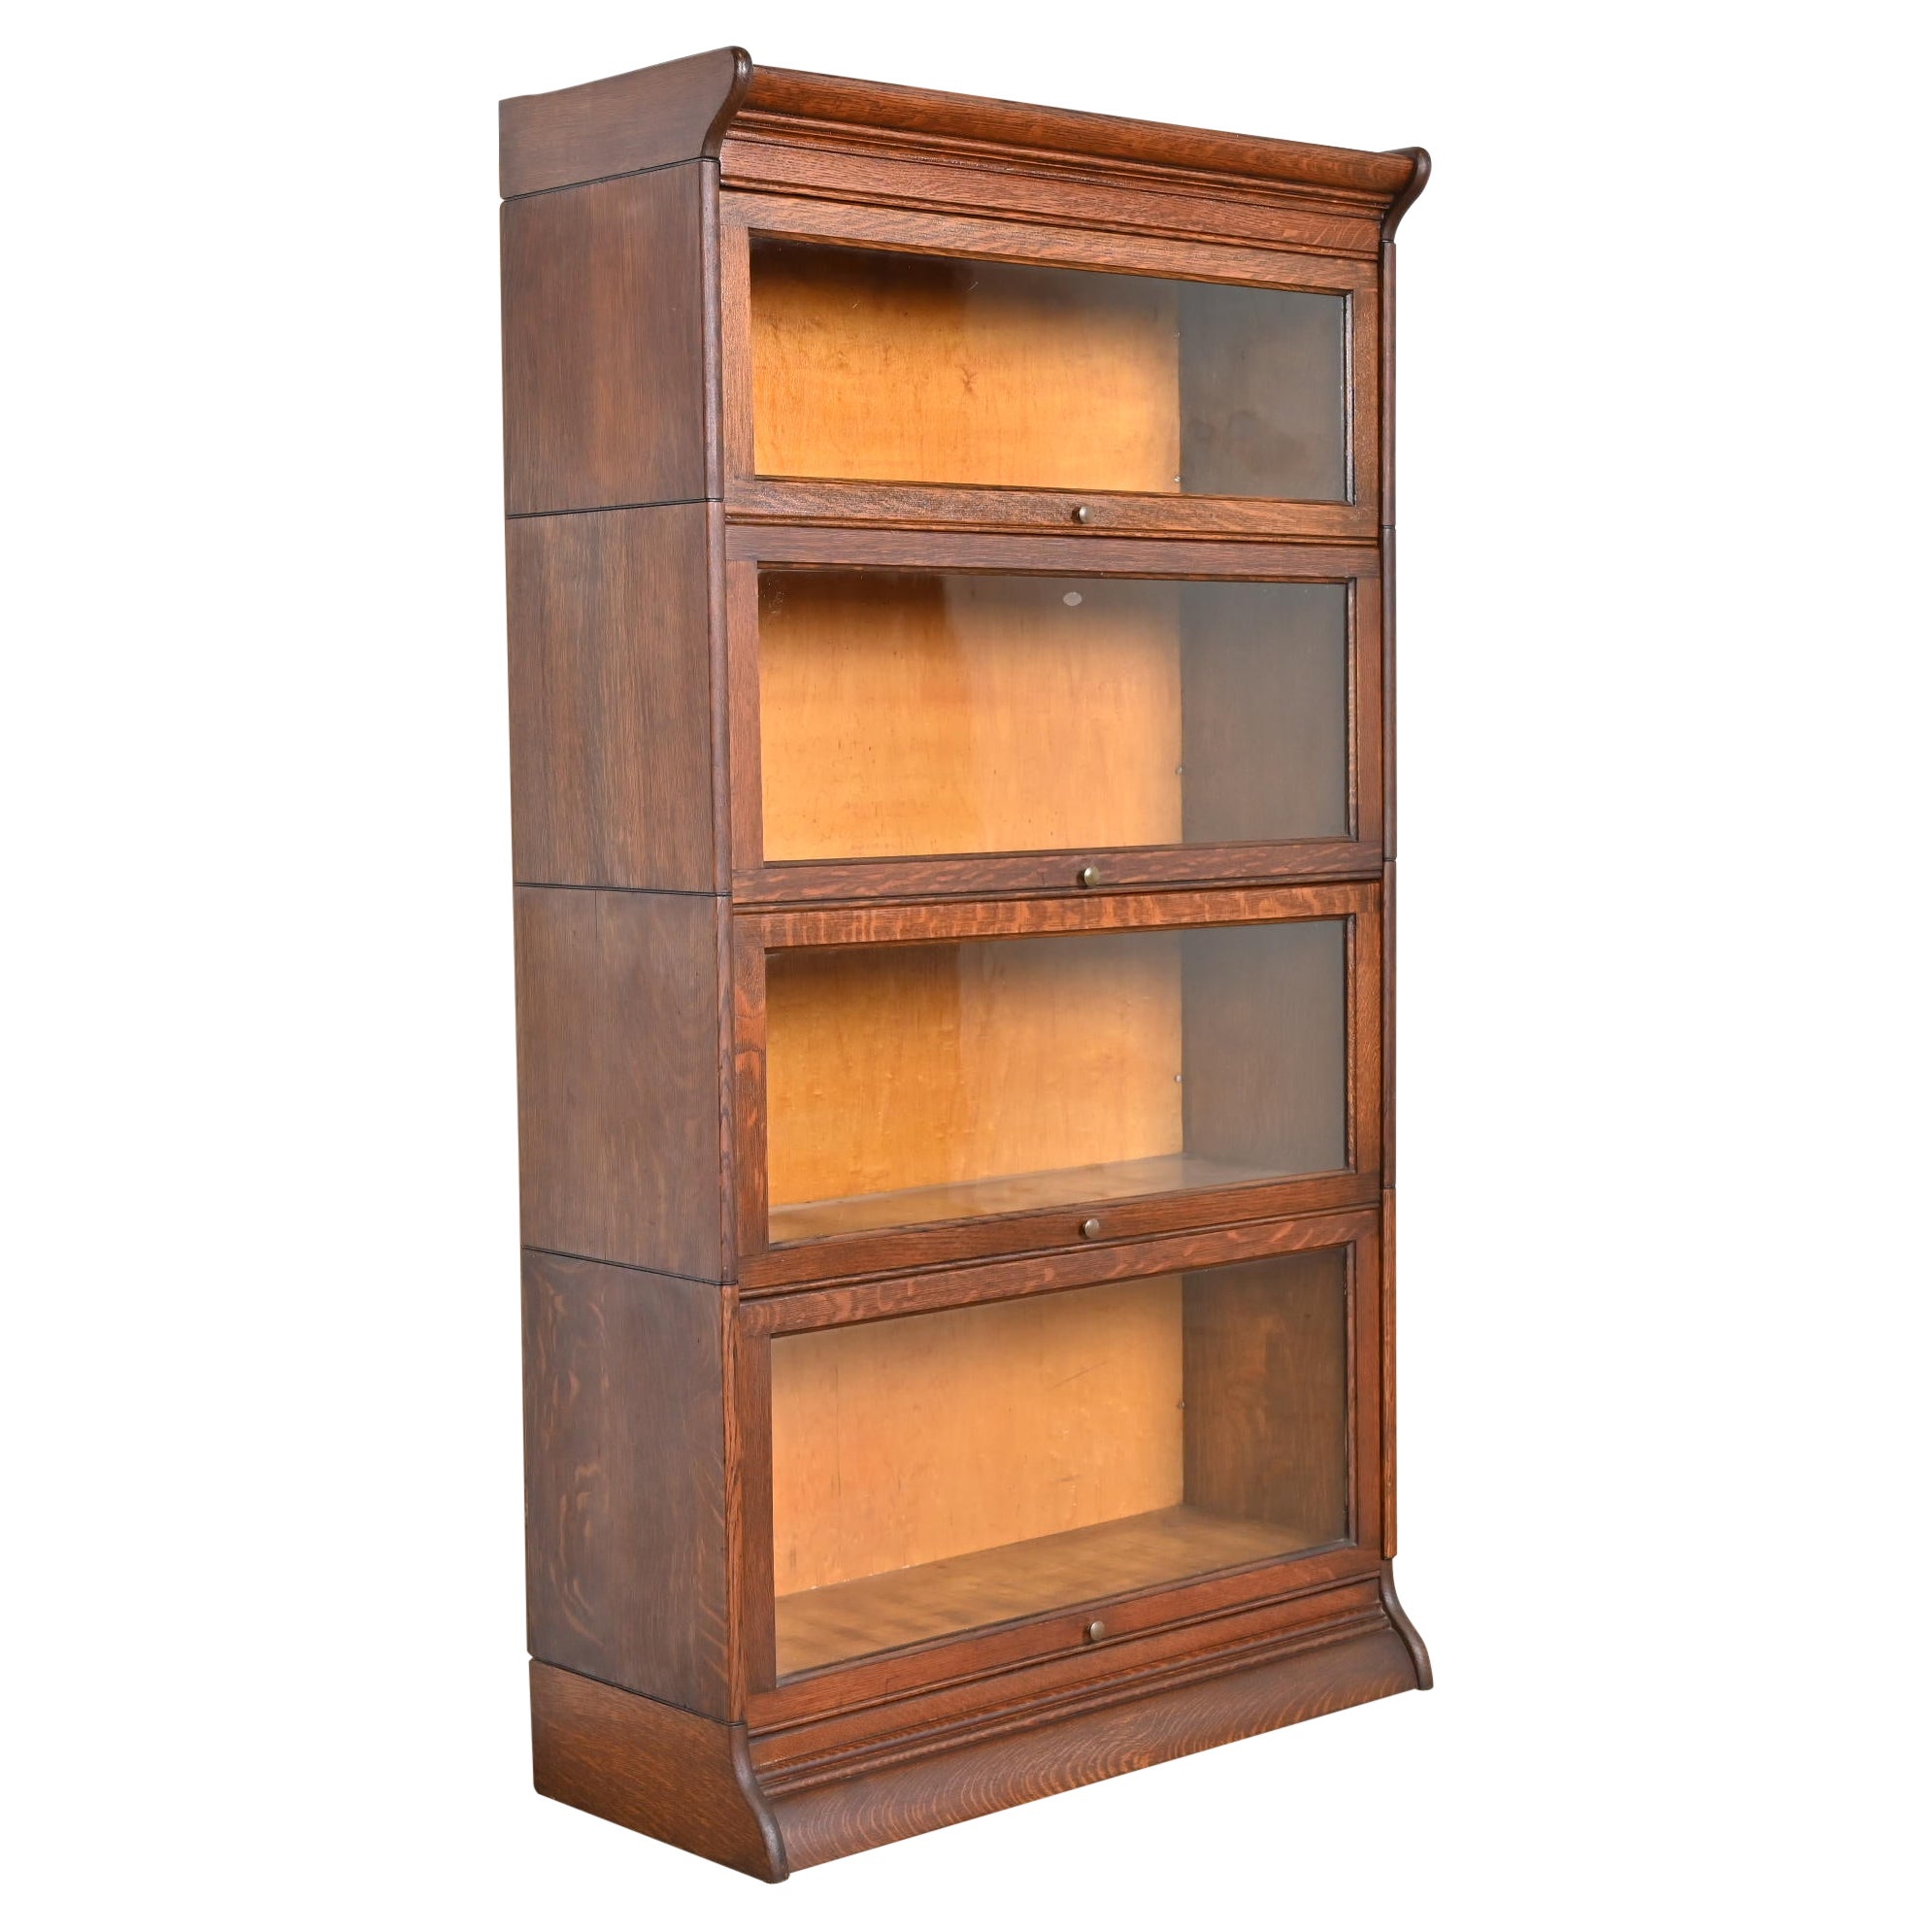 Antique Arts & Crafts Oak Four-Stack Barrister Bookcase by Gunn Furniture, 1920s For Sale